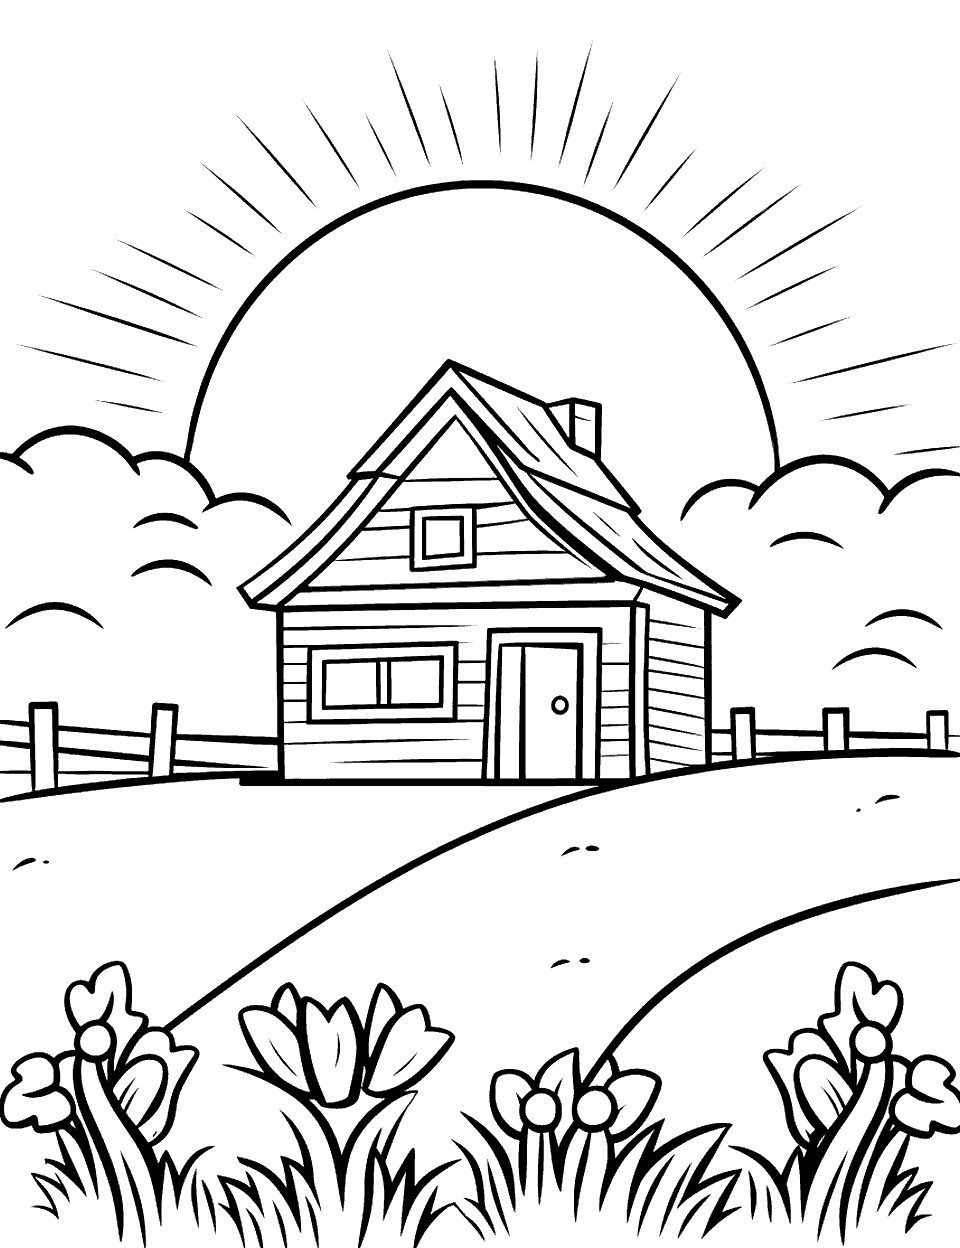 Farmhouse Morning Farm Coloring Page - A farmhouse with a rising sun in the background.